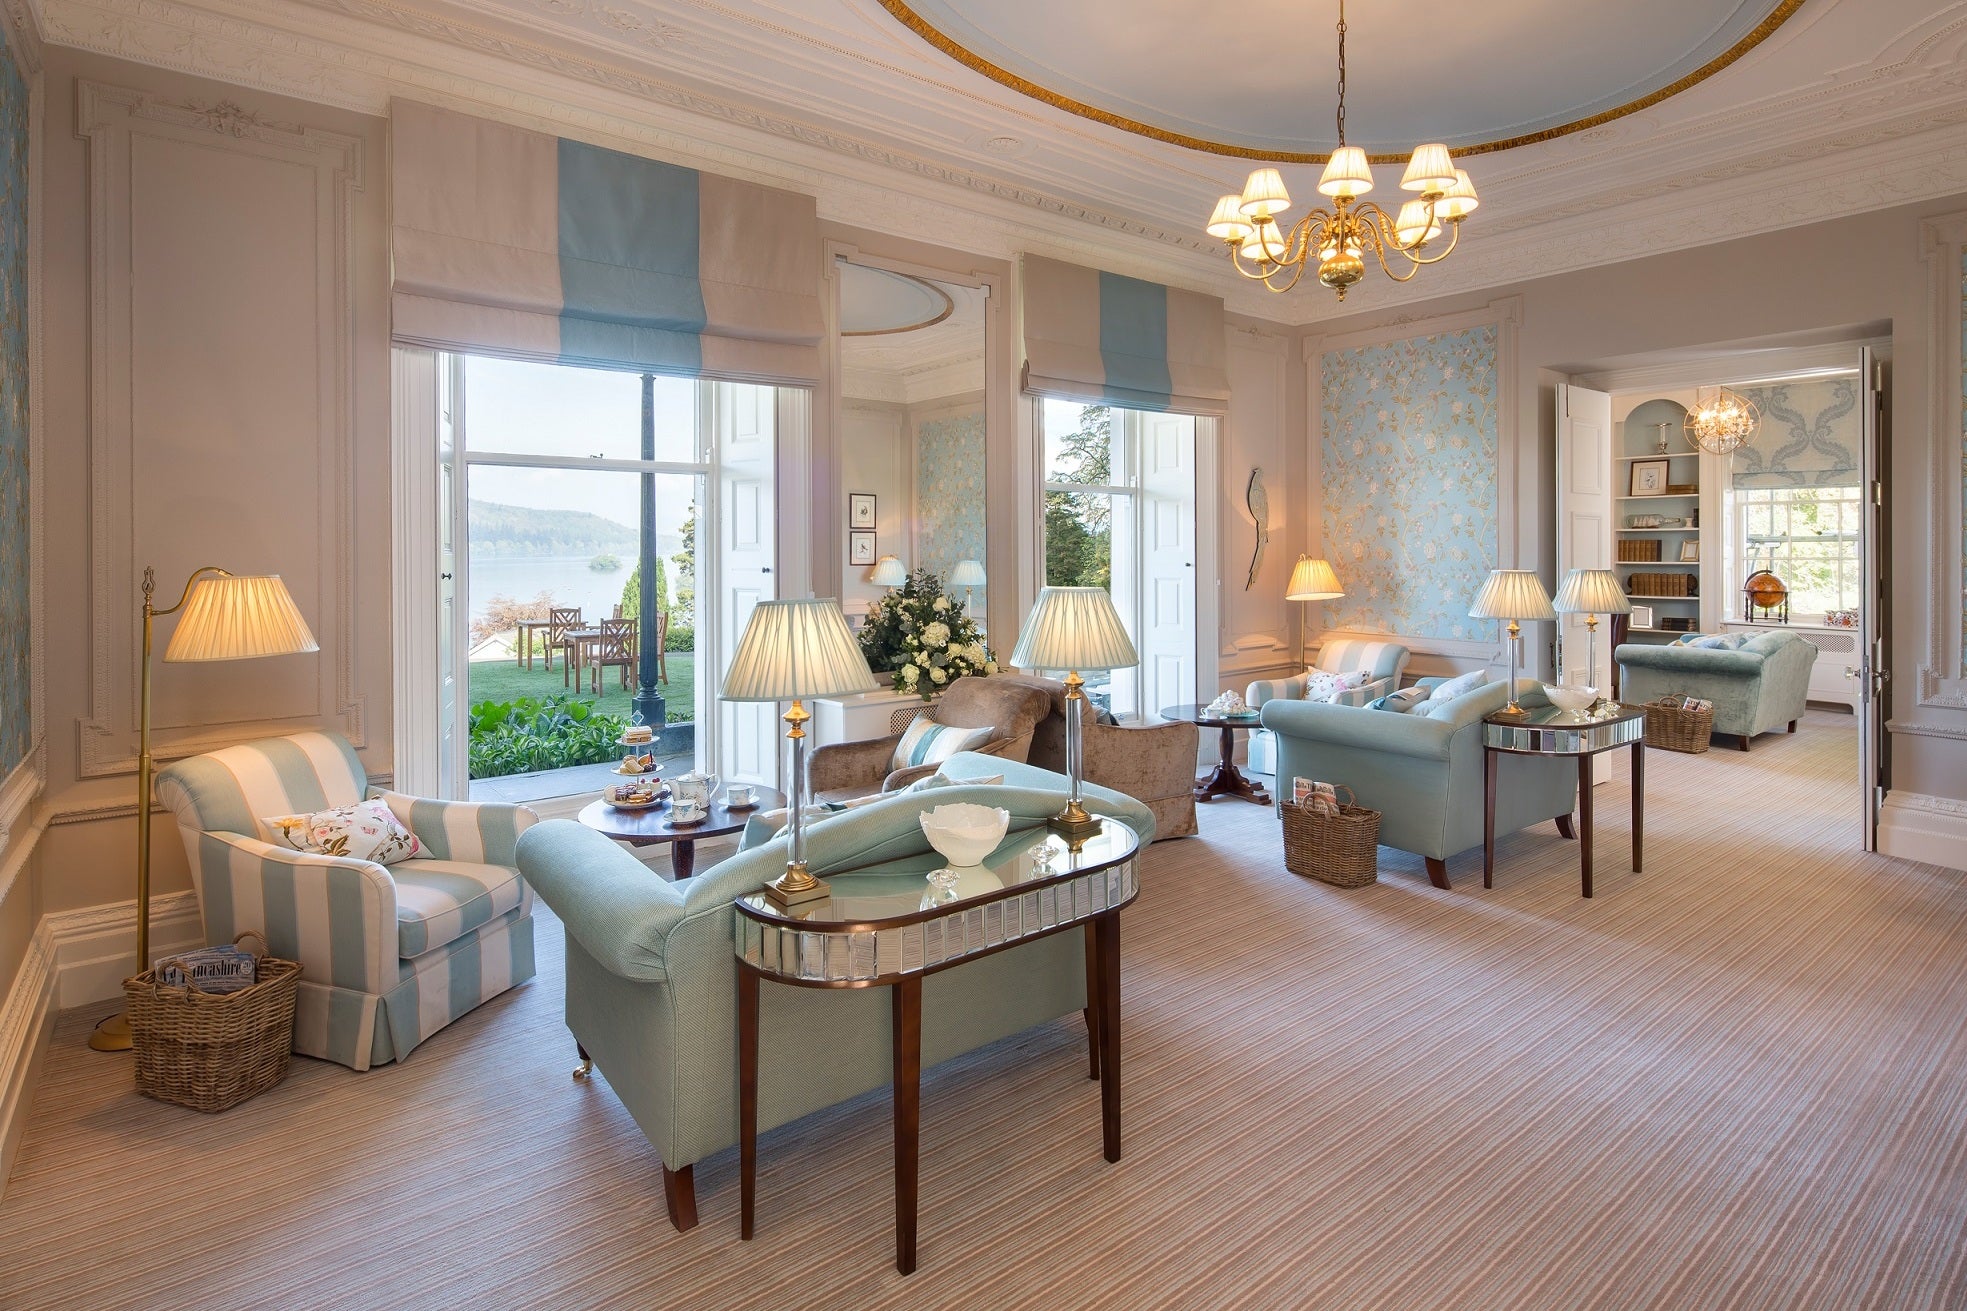 The Belsfield combines sumptuous decors with views of Lake Windermere